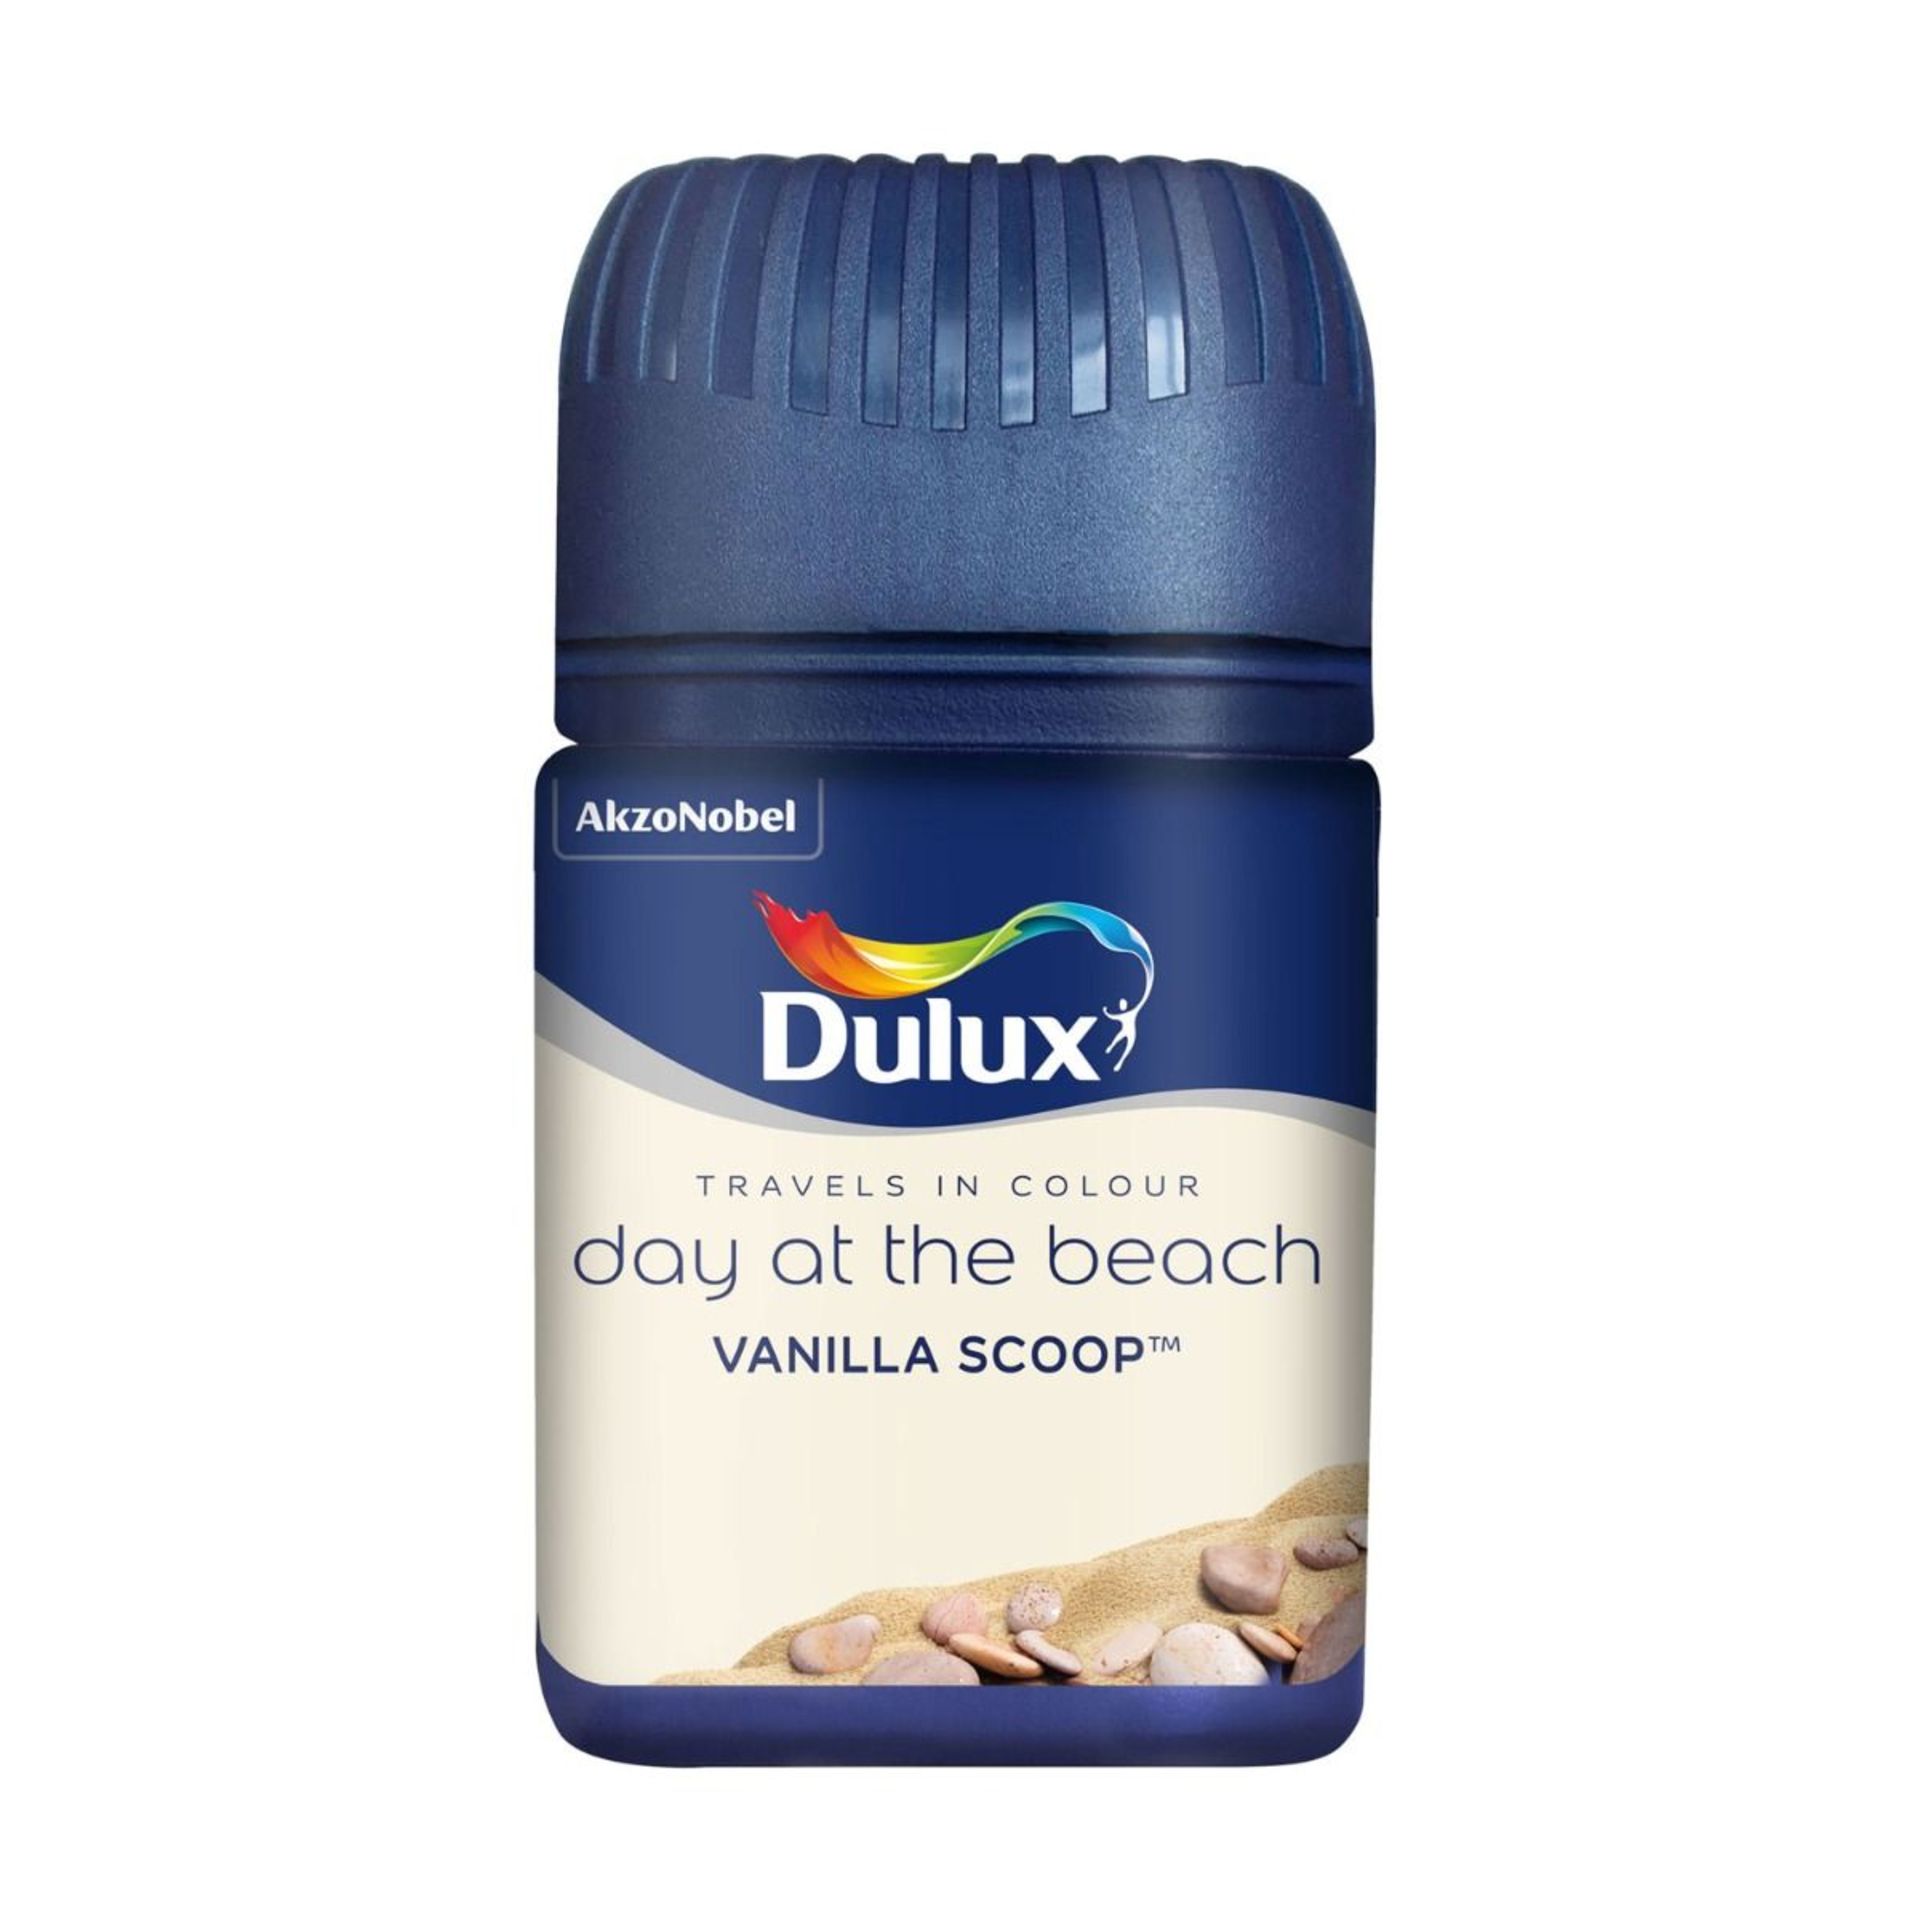 Approximately 1,000 Dulux Wall & Ceiling Paint Testers | 50ml Units - Image 2 of 4